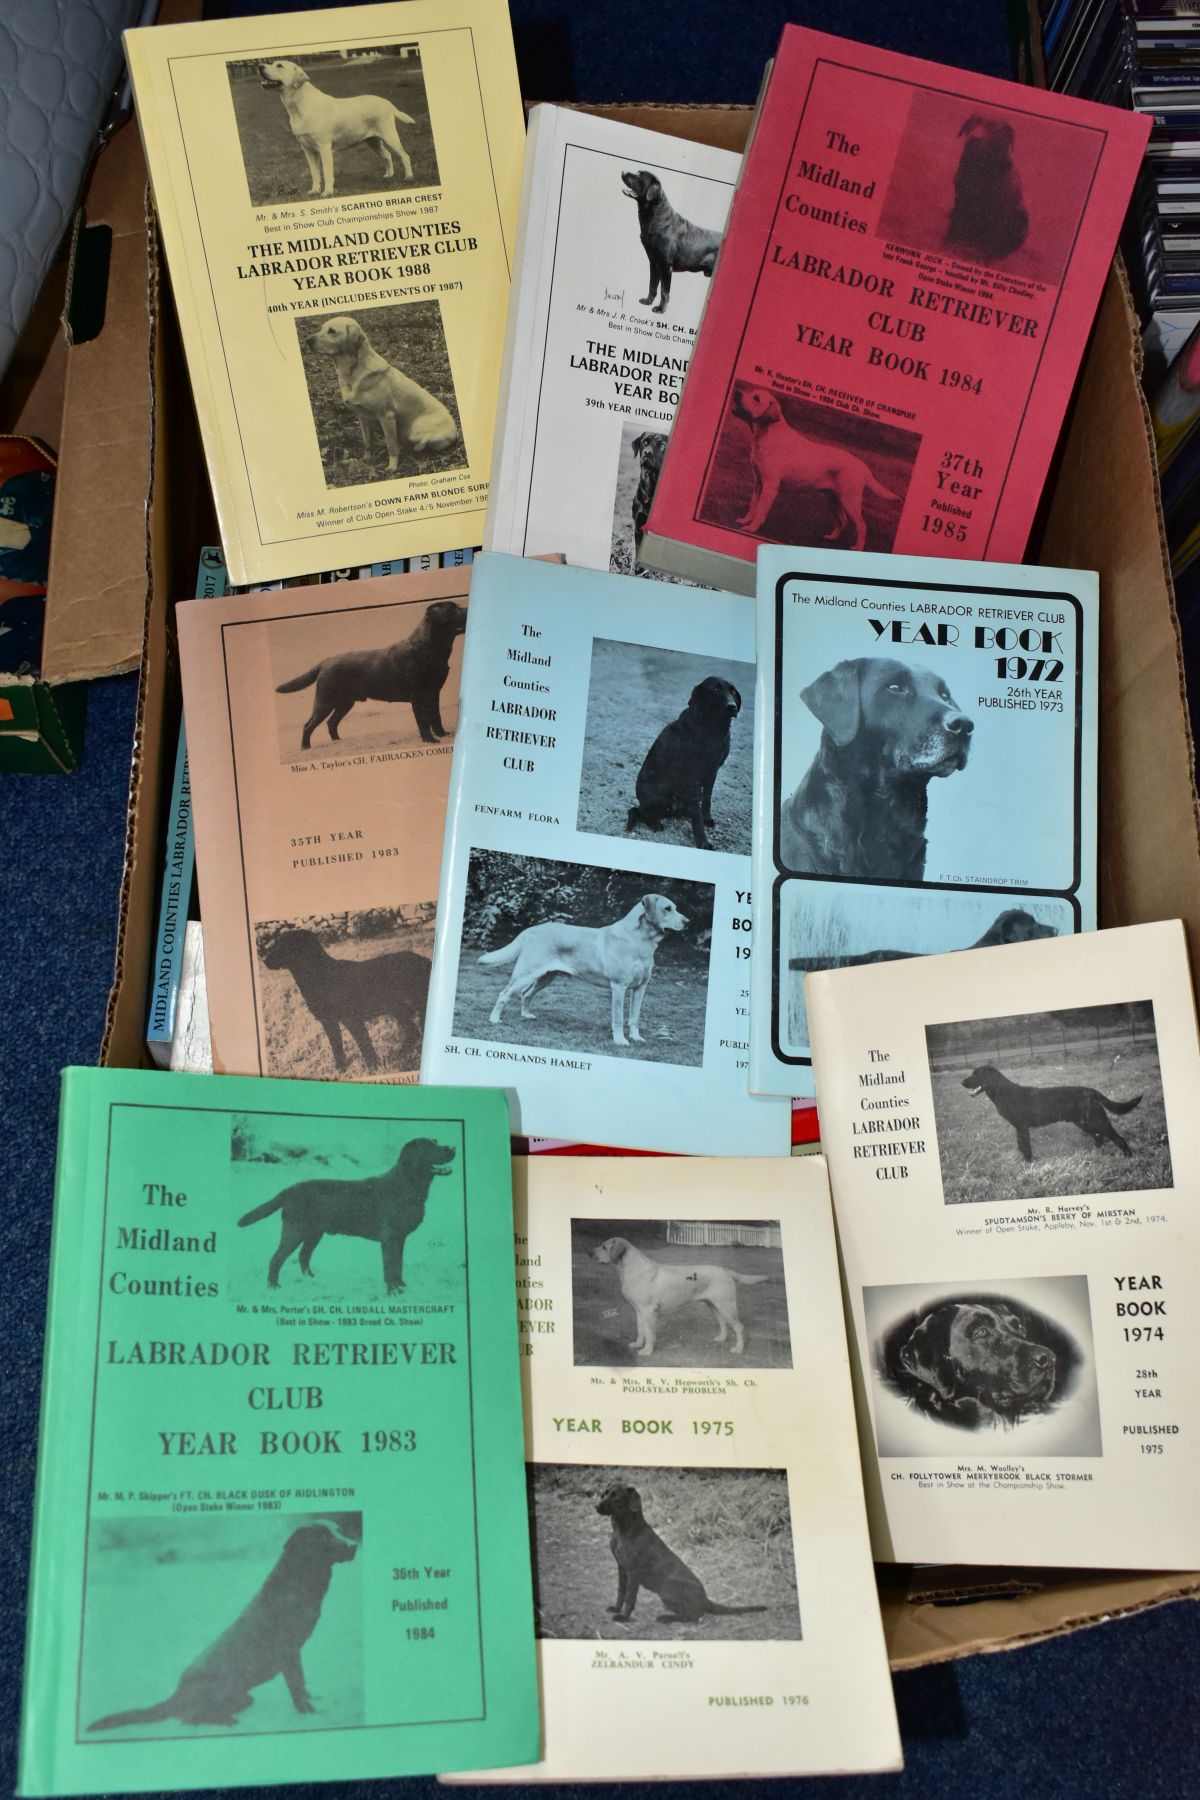 A BOX OF MIDLAND COUNTIES LABRADOR RETRIEVER CLUB YEAR BOOKS AND OTHER BOOKS ABOUT DOGS, to - Image 3 of 3